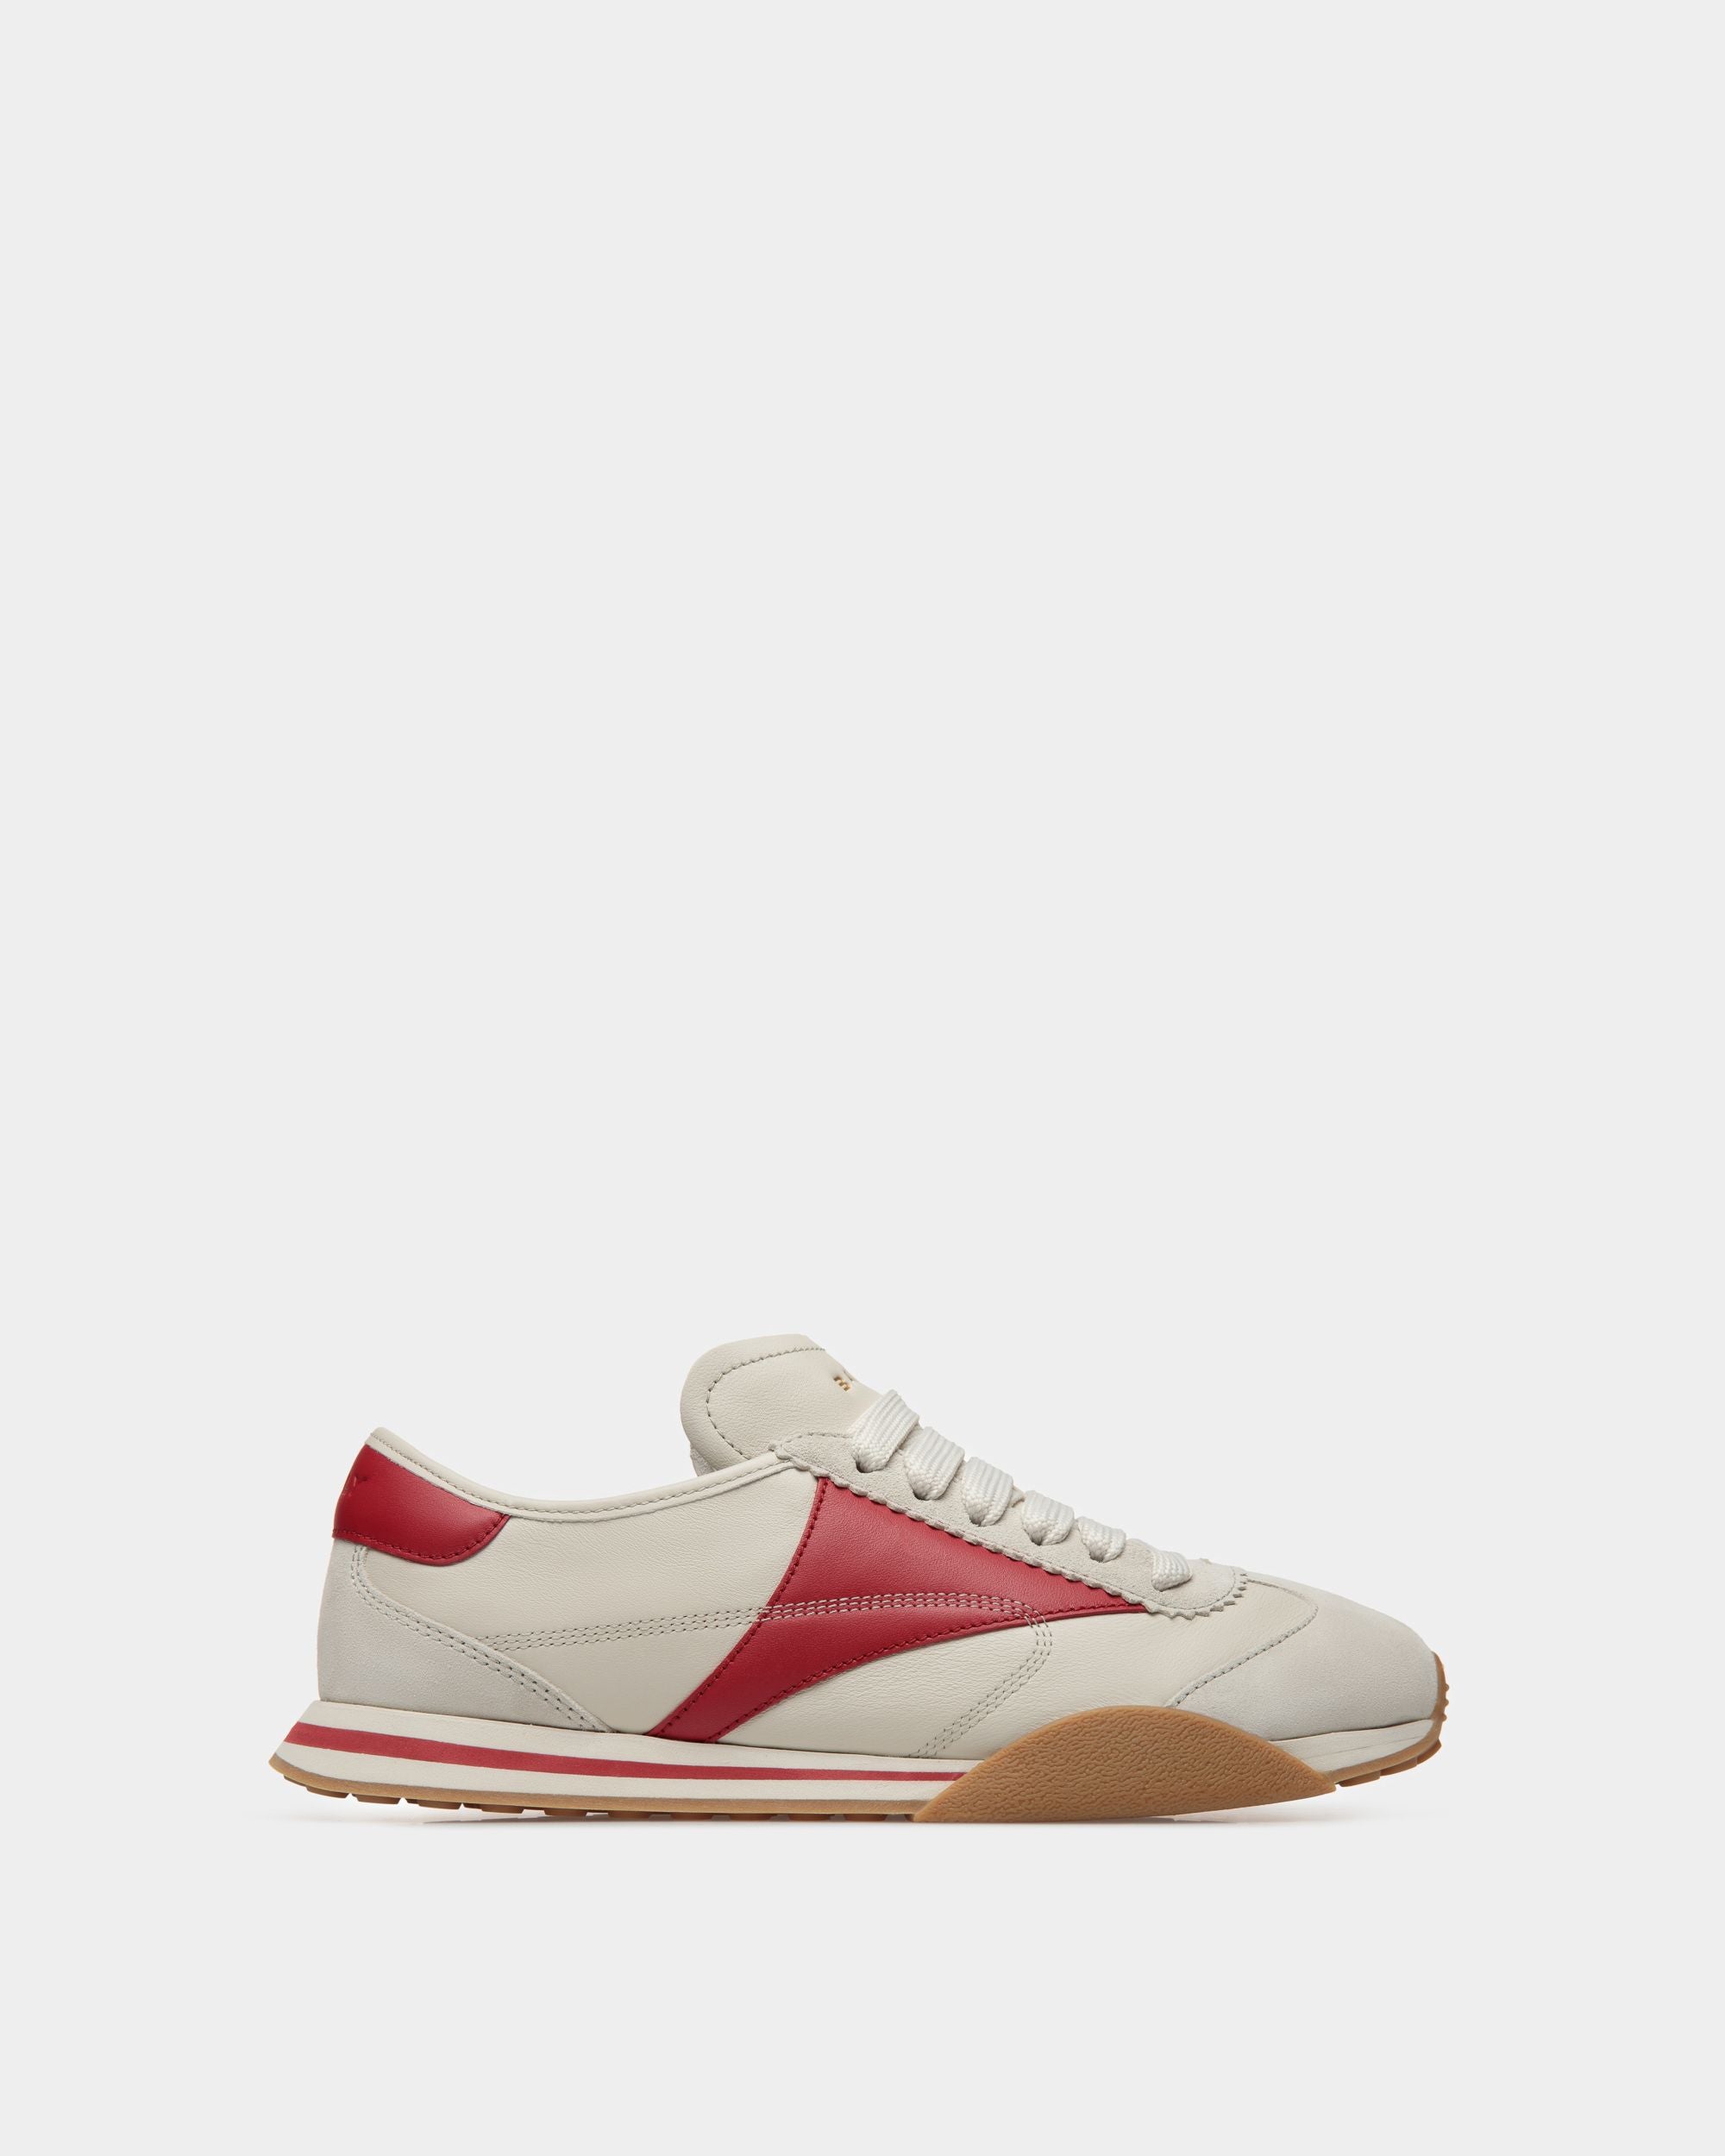 Sonney | Men's Sneakers | Dusty White And Deep Ruby Leather | Bally | Still Life Side